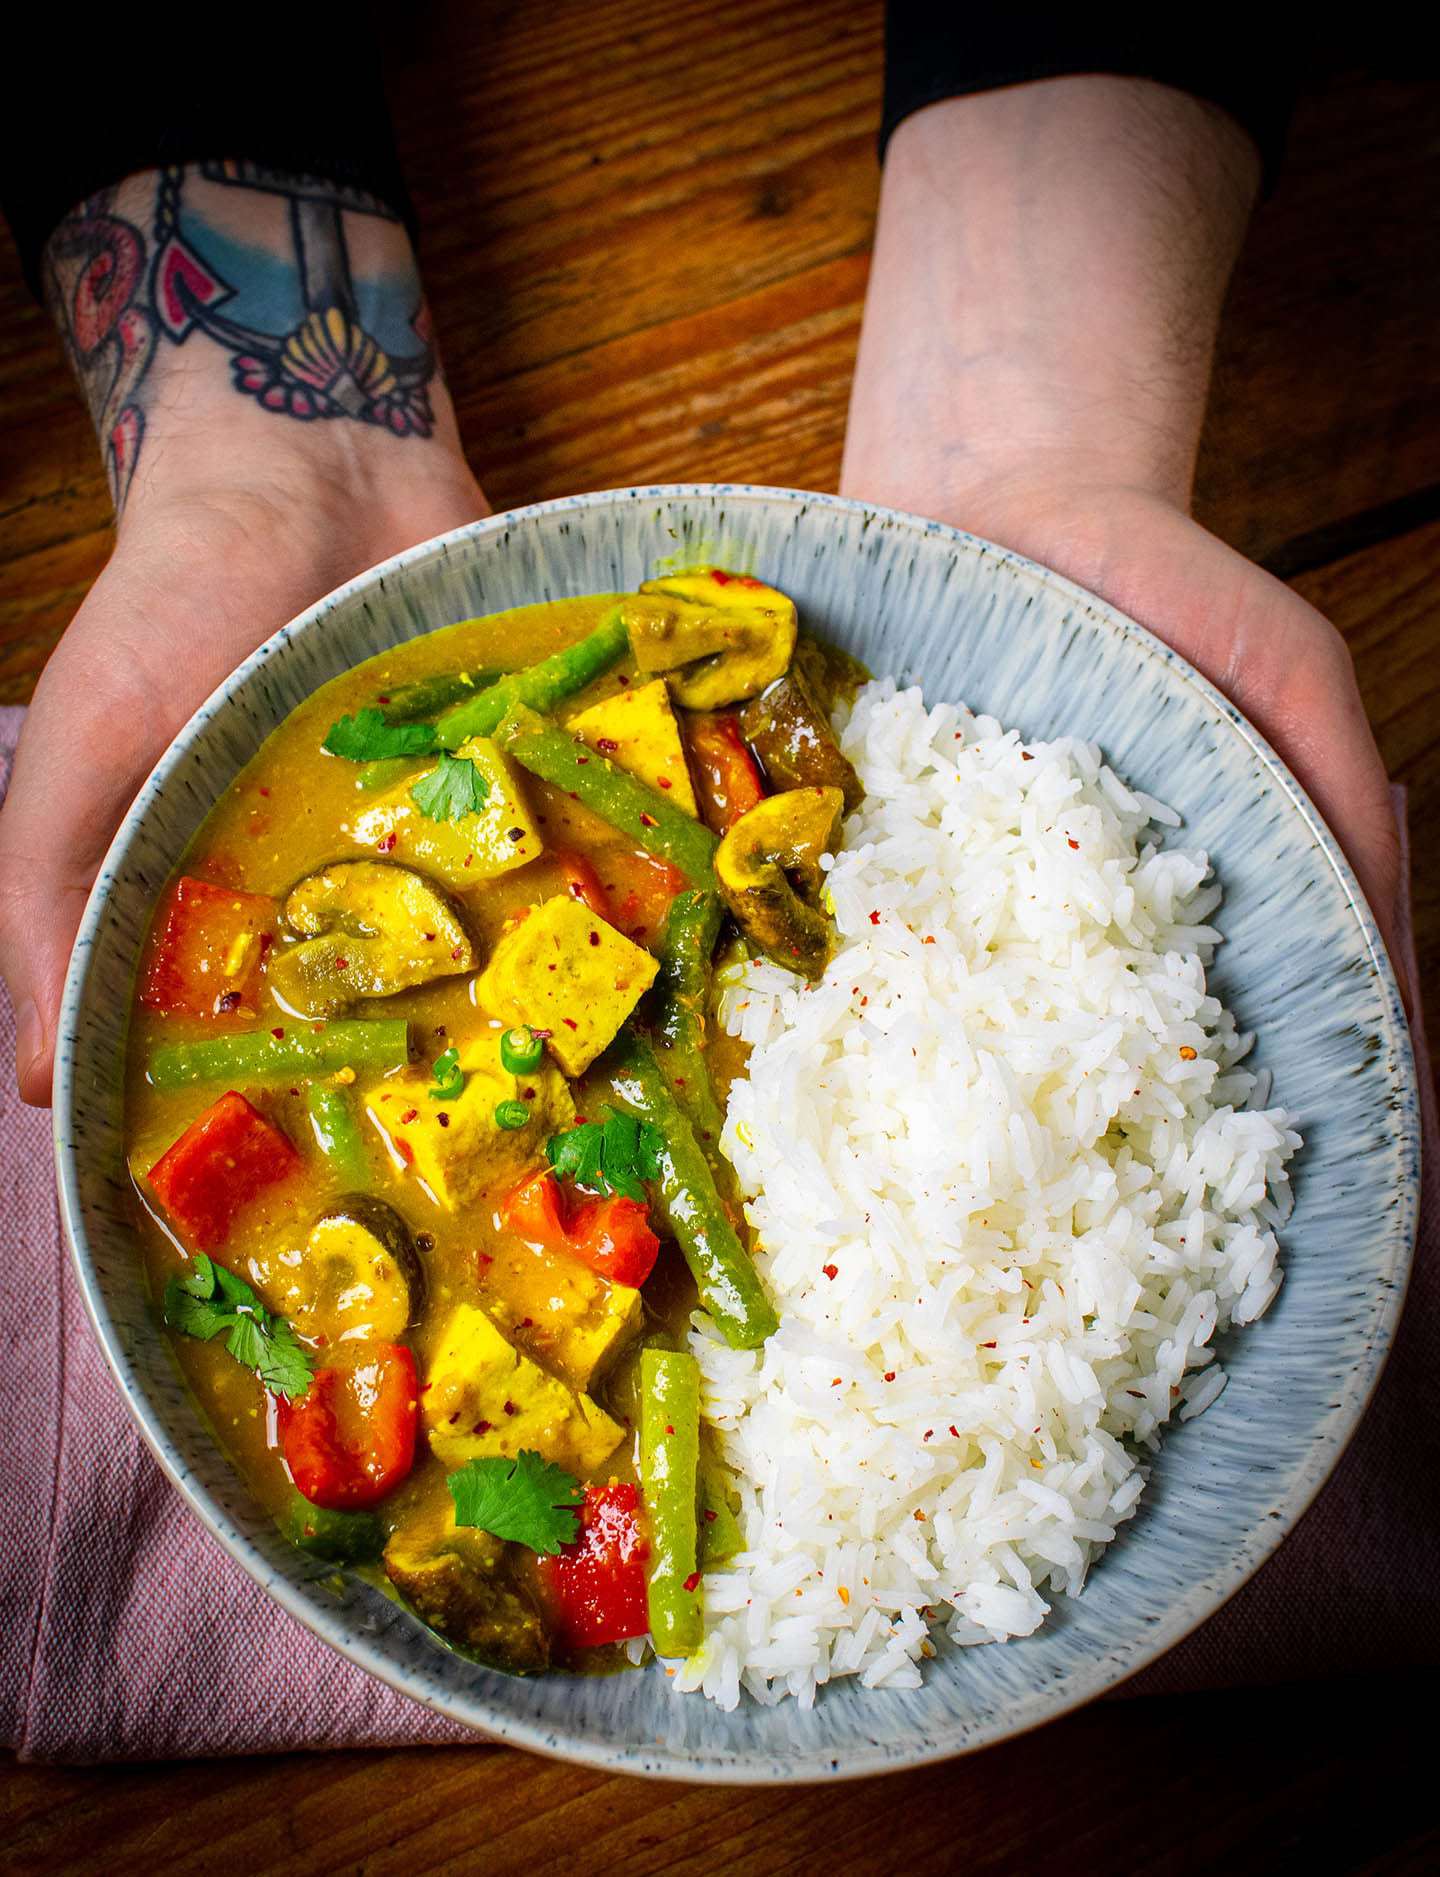 A blue bowl containing the vegan yellow curry. being held up by two hands. Tofu, mushrooms, green beans and red pepper can be seen